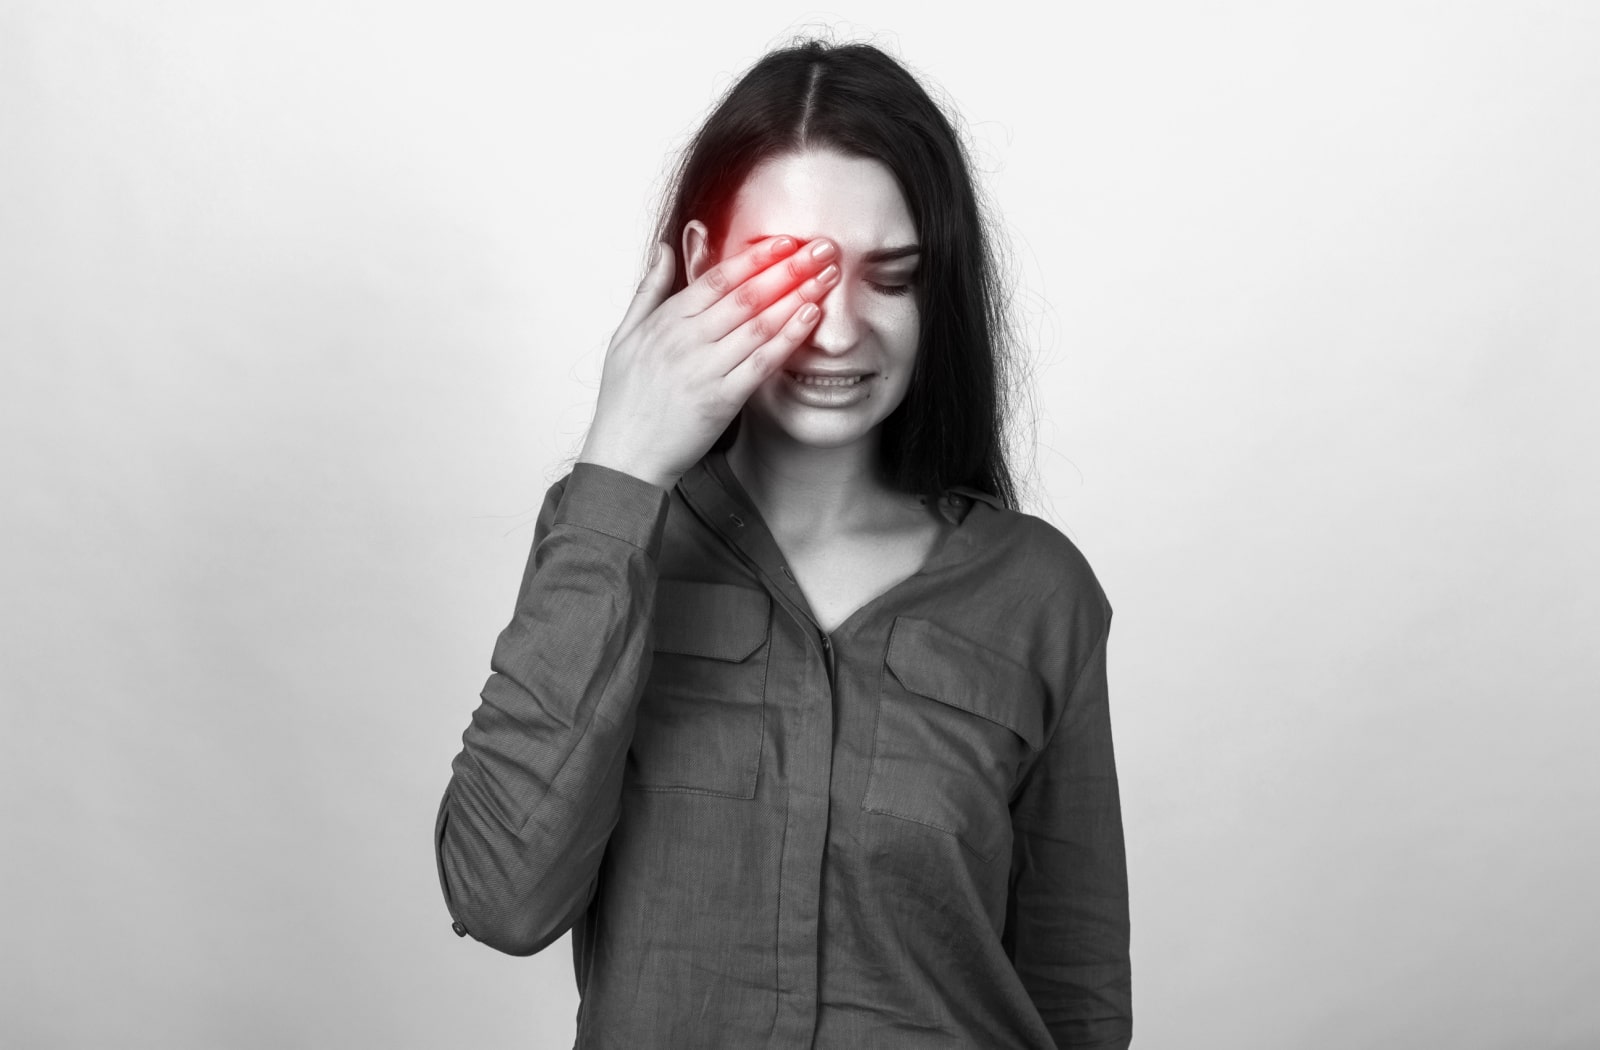 A woman holding her right hand over her eye due to eye pain